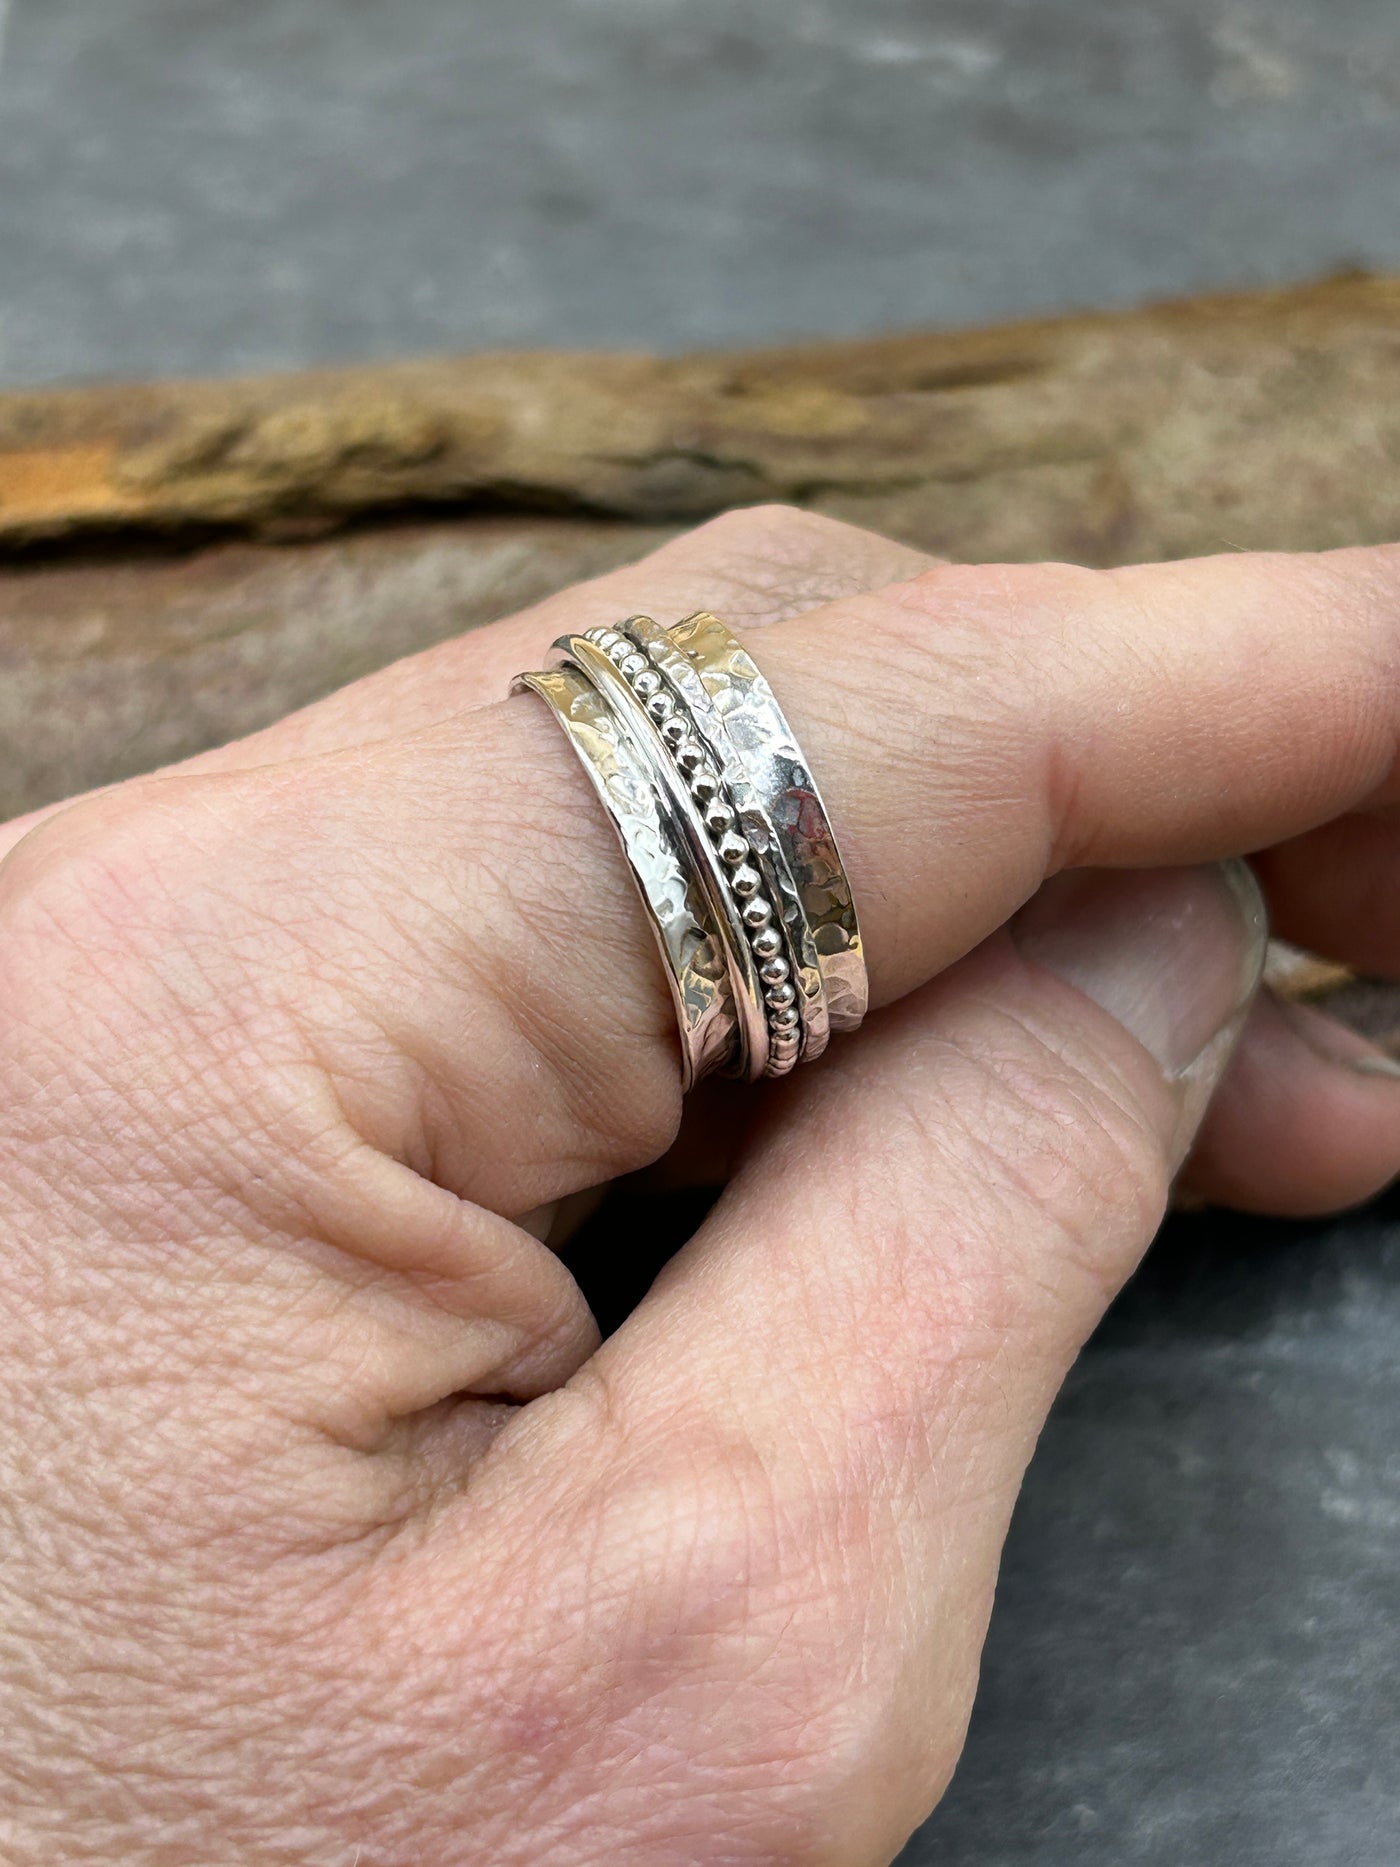 Sterling Silver Spinner ring - Three spinners